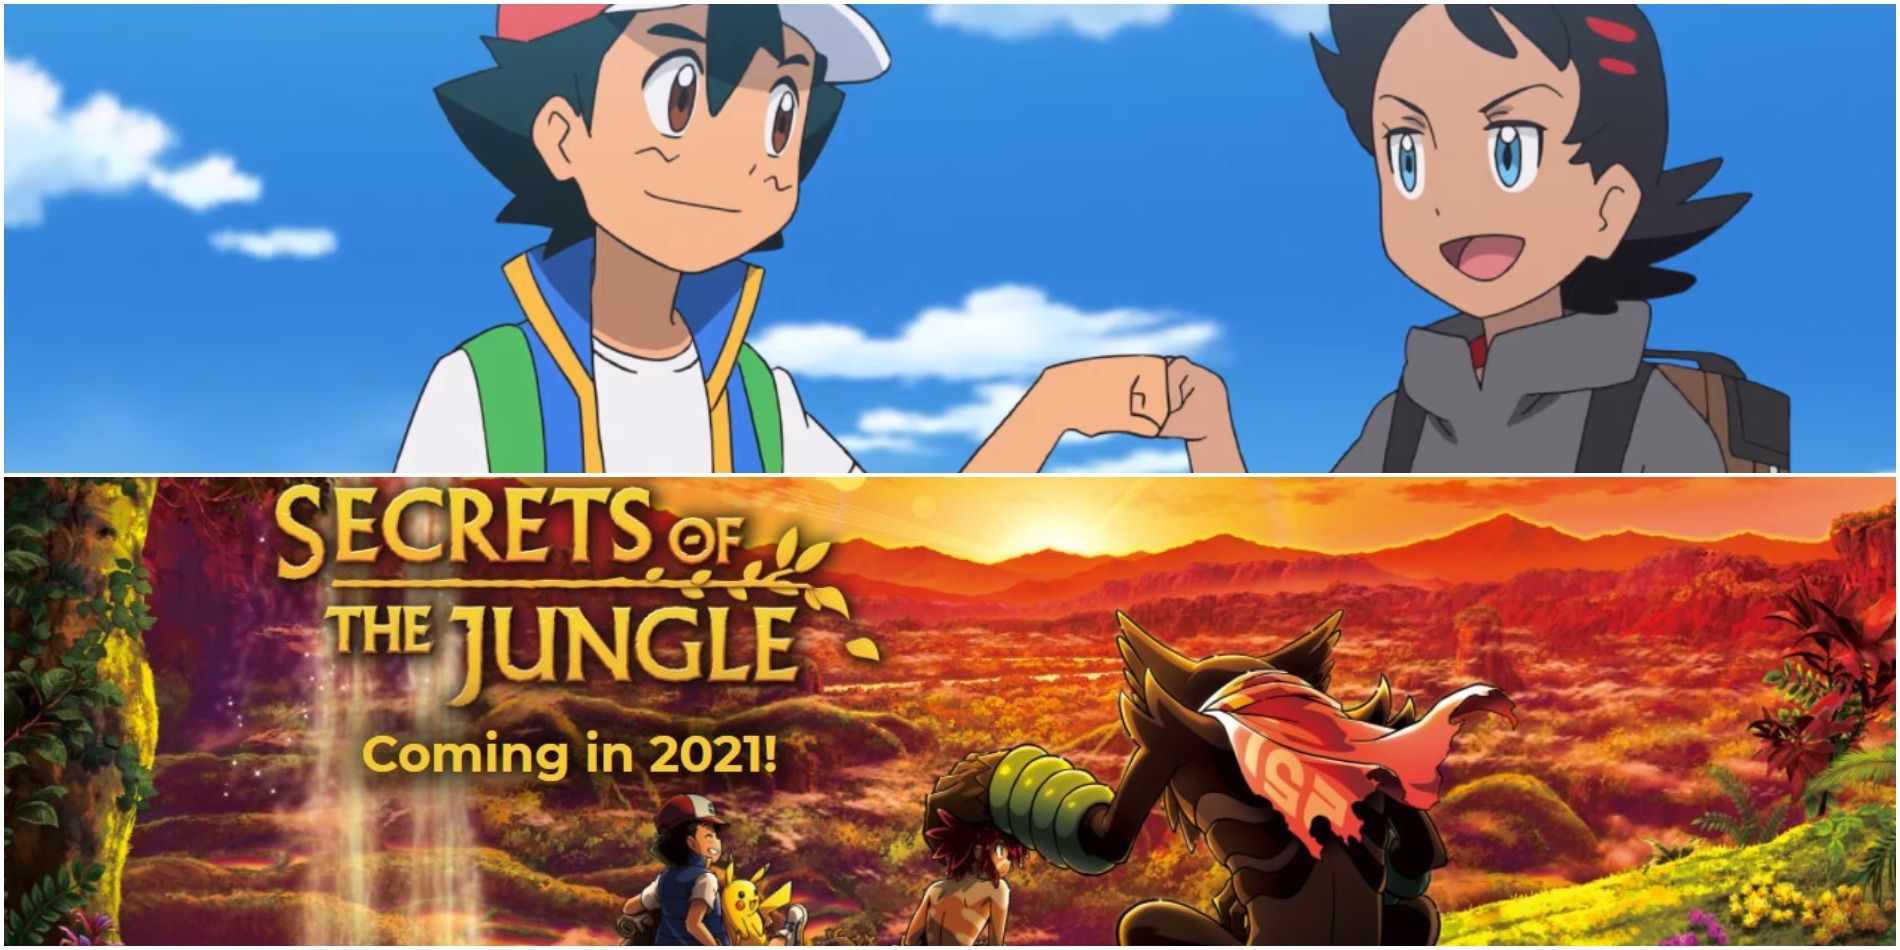 Still from the Pokémon Journeys anime series and a teaser image for the 23rd movie coming to the west